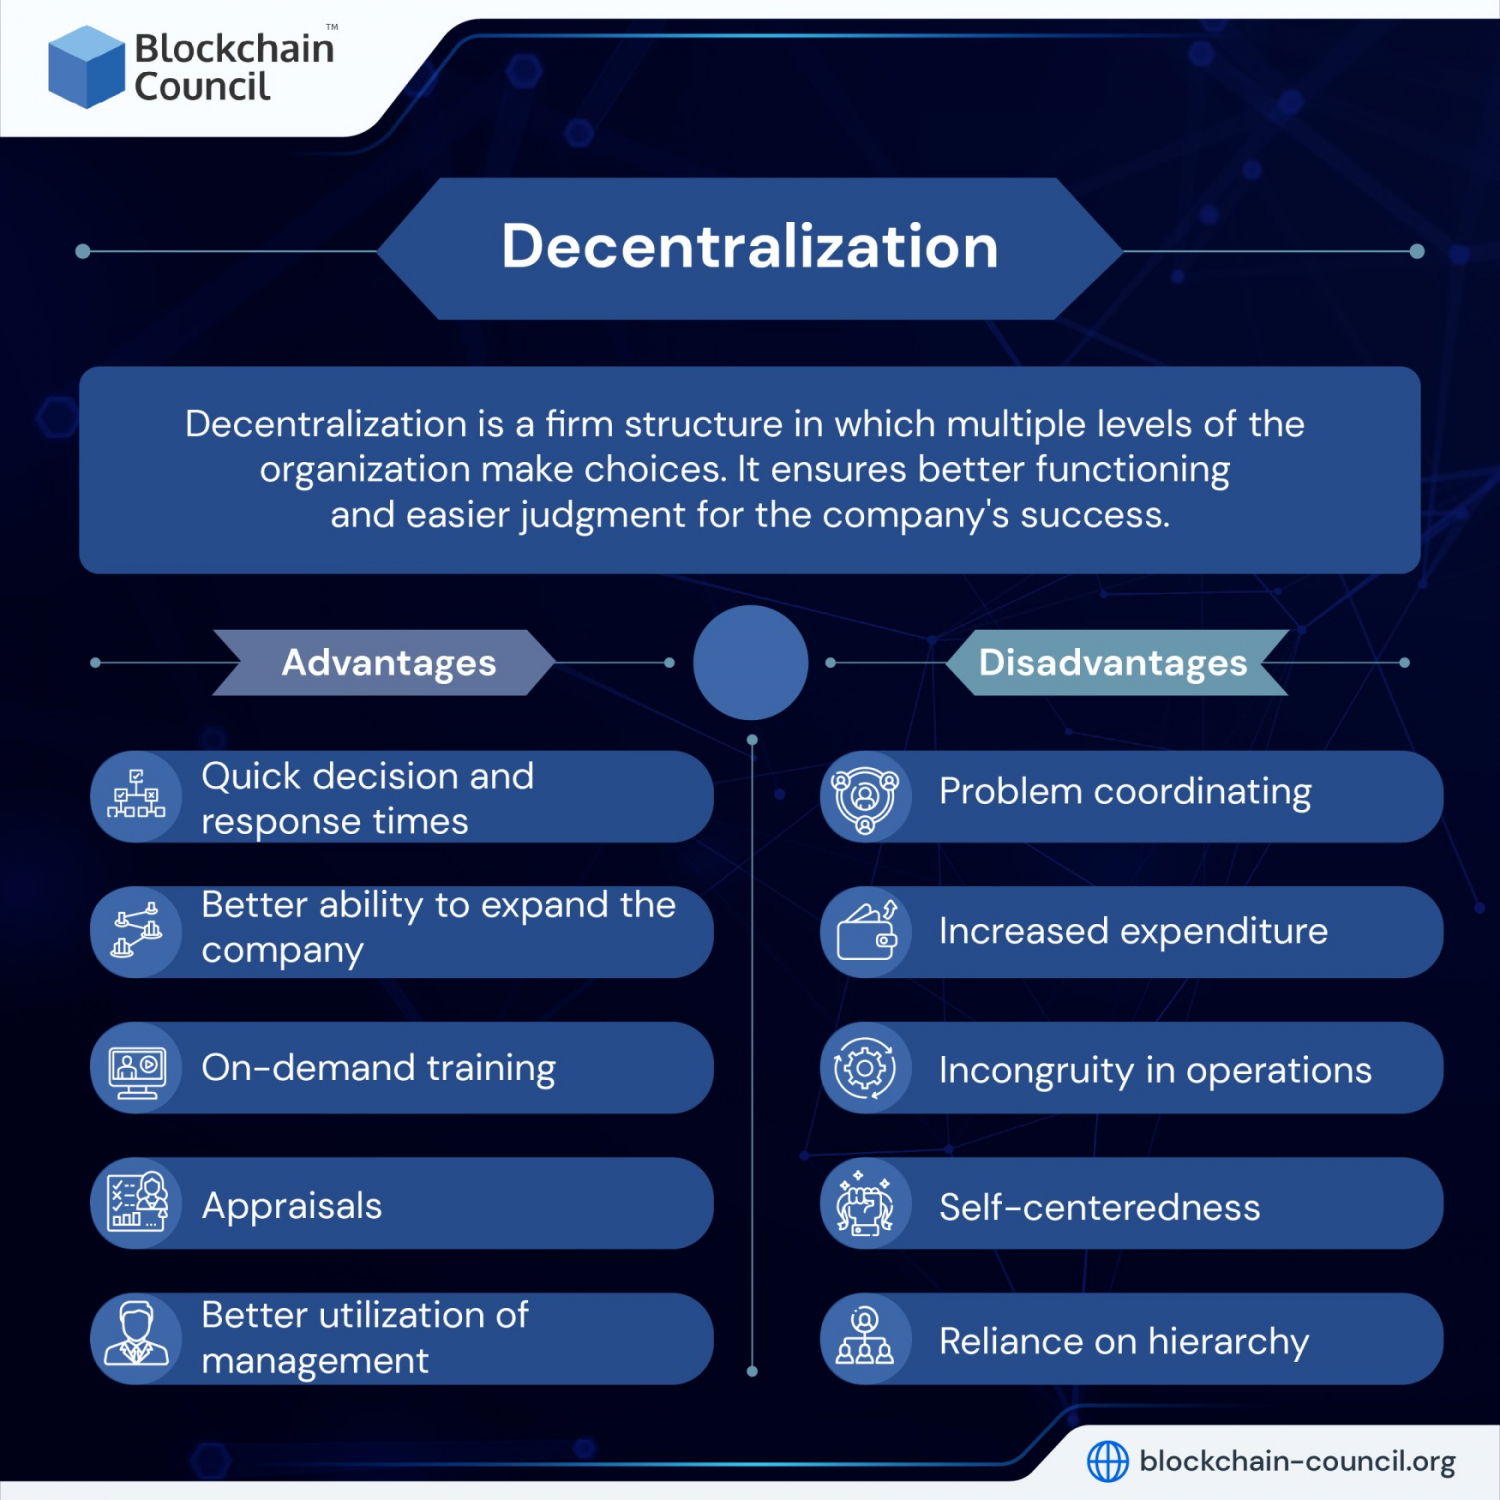 difference between centralized and decentralized crypto exchange